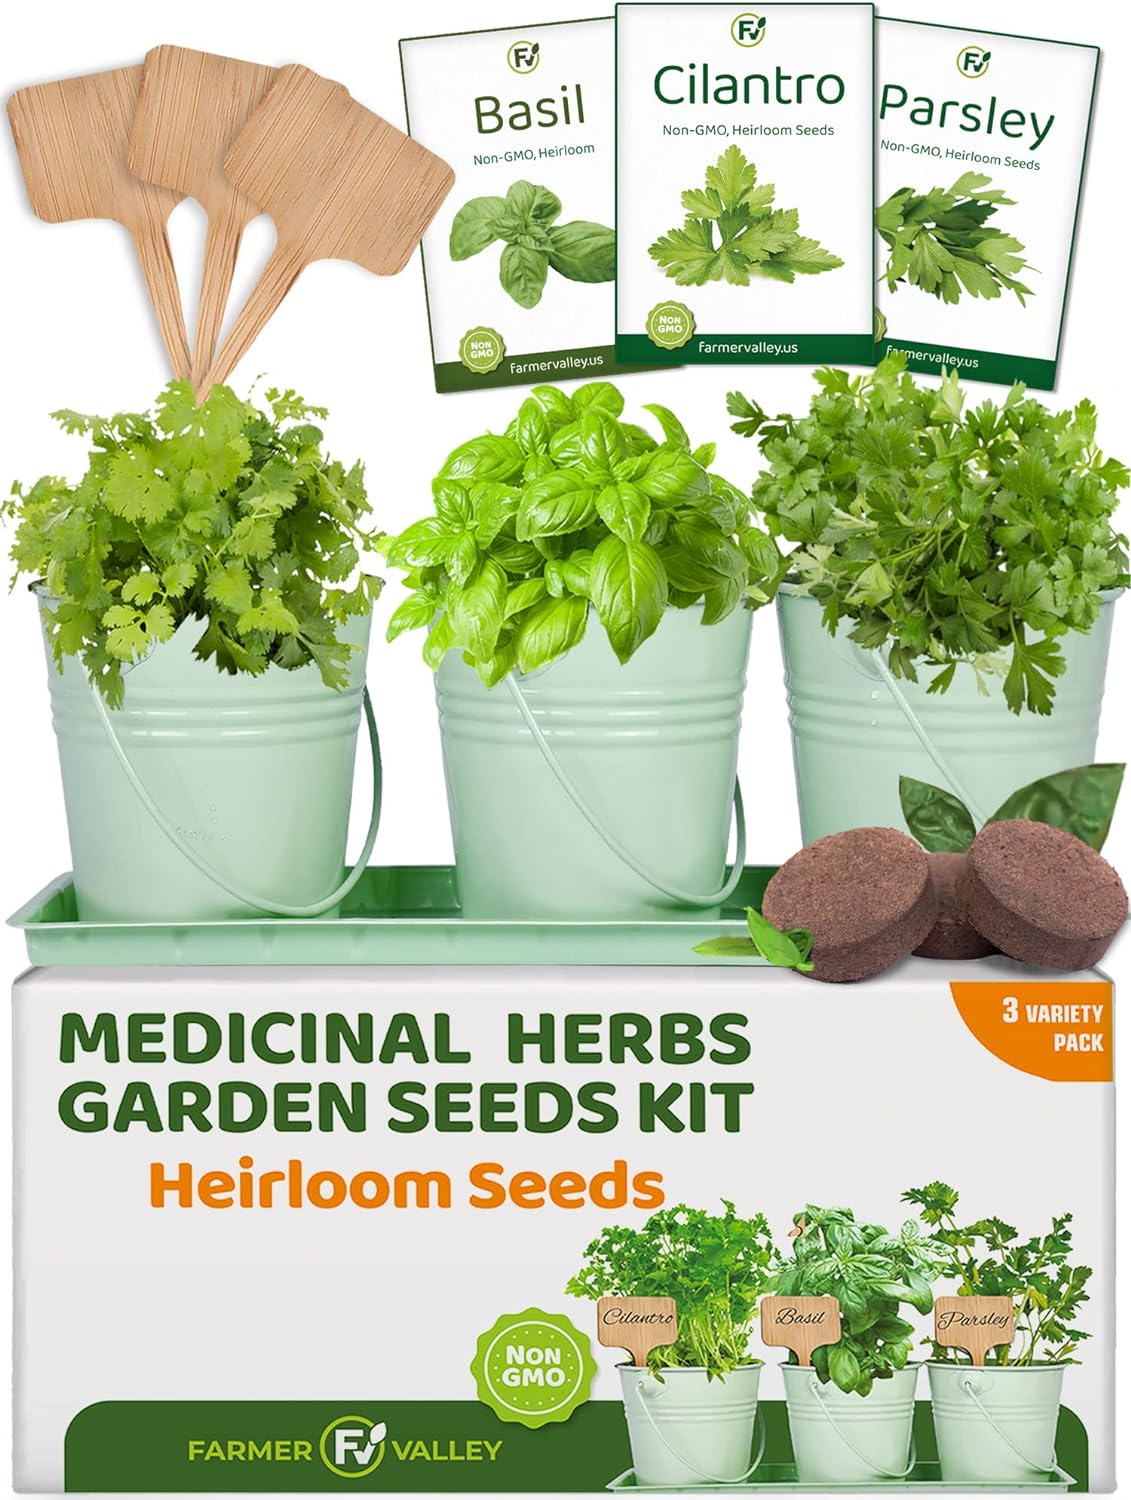 Herb Garden Starter Kit - Medicinal  Tea Heirloom, Non GMO Herb Seeds - Basil, Cilantro, Parsley - Deluxe Metal Pots, Soil, Plant Markers Included - Made in USA - Indoor and Outdoor Home Gardening